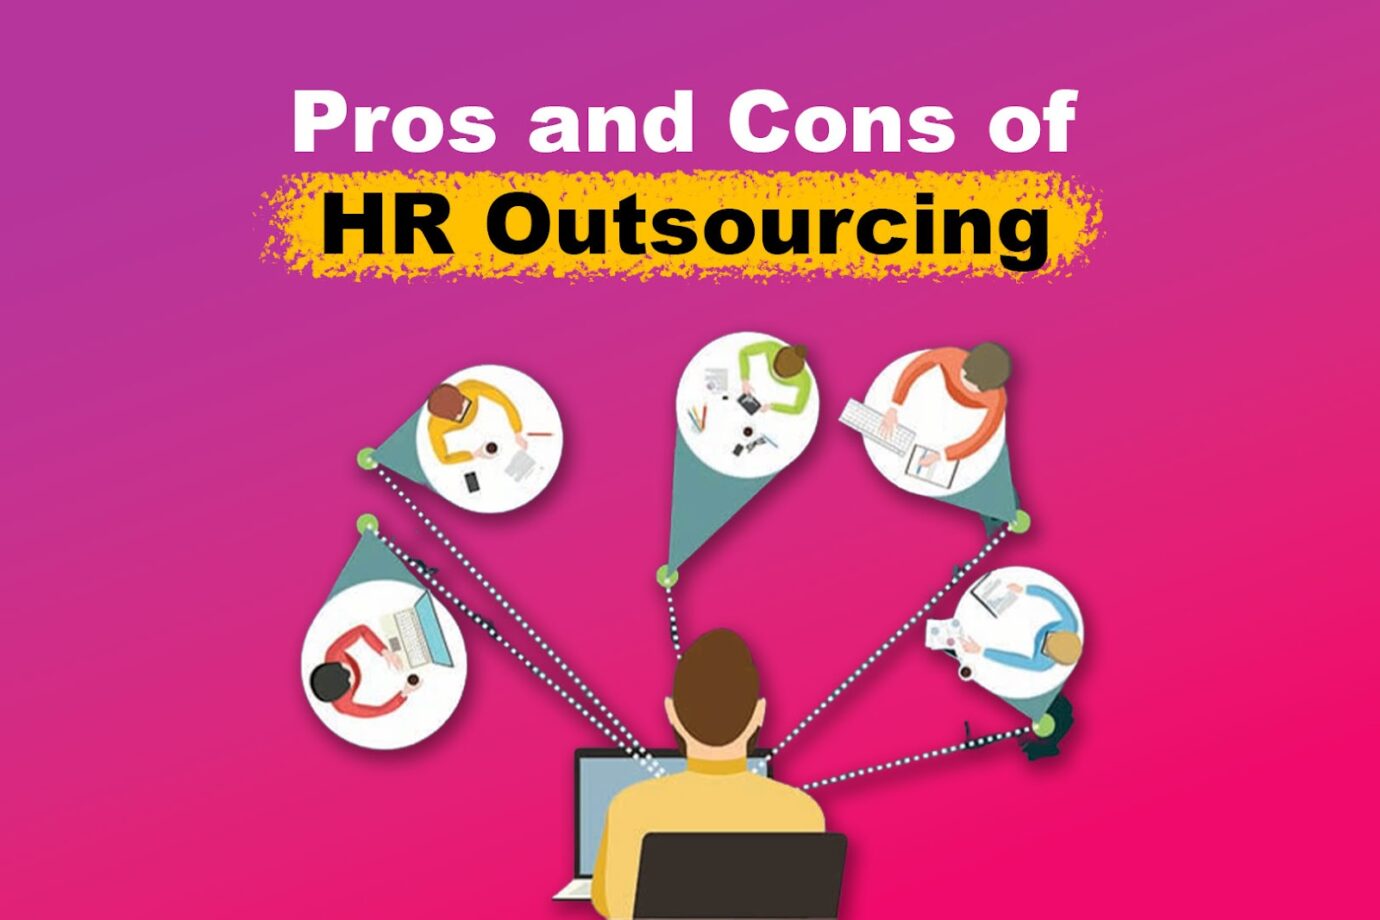 What Are the Pros and Cons of HR Outsourcing?